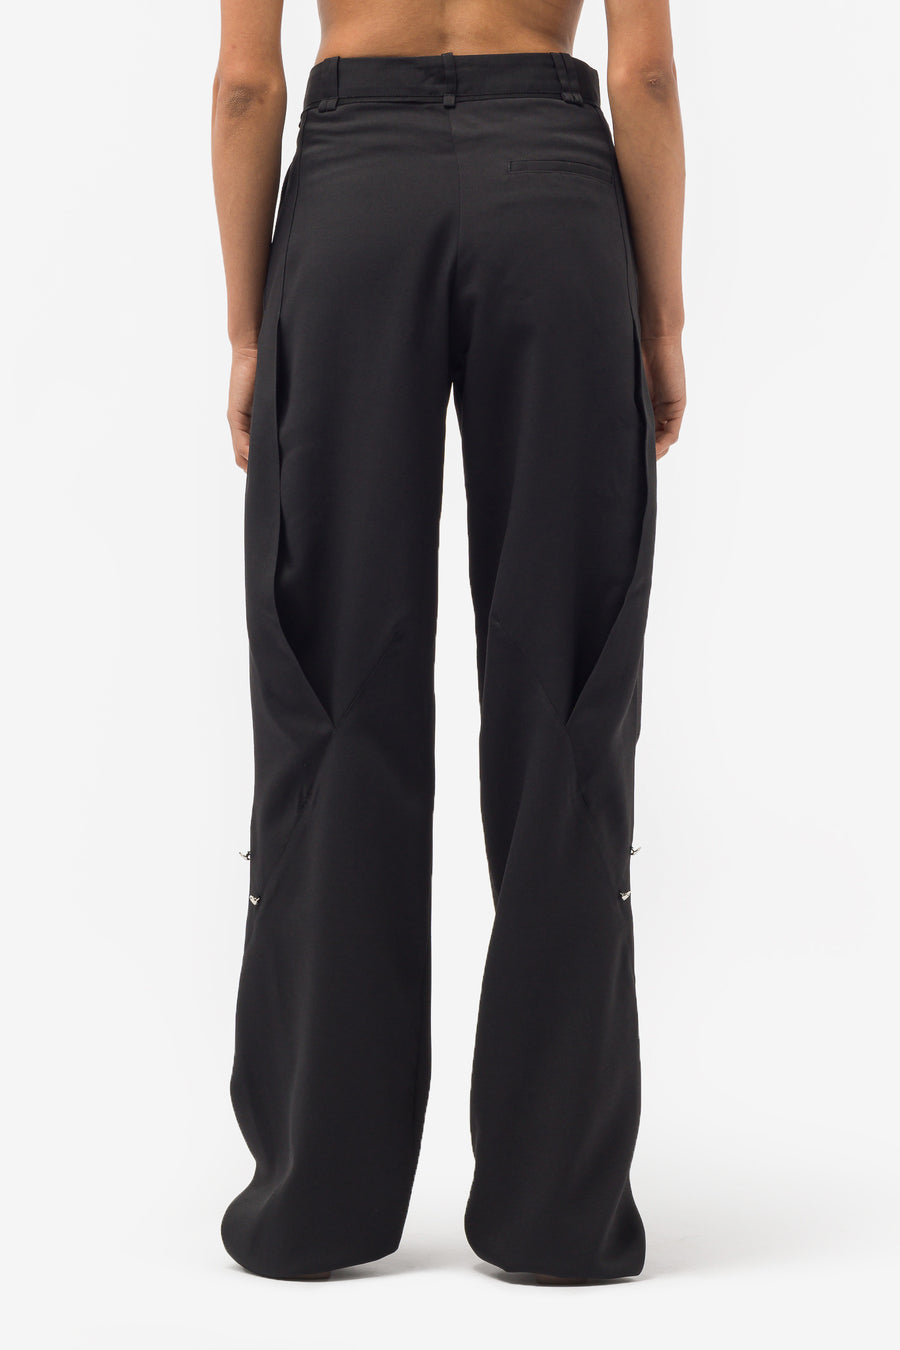 Hina Pleat Trousers in Crow Black